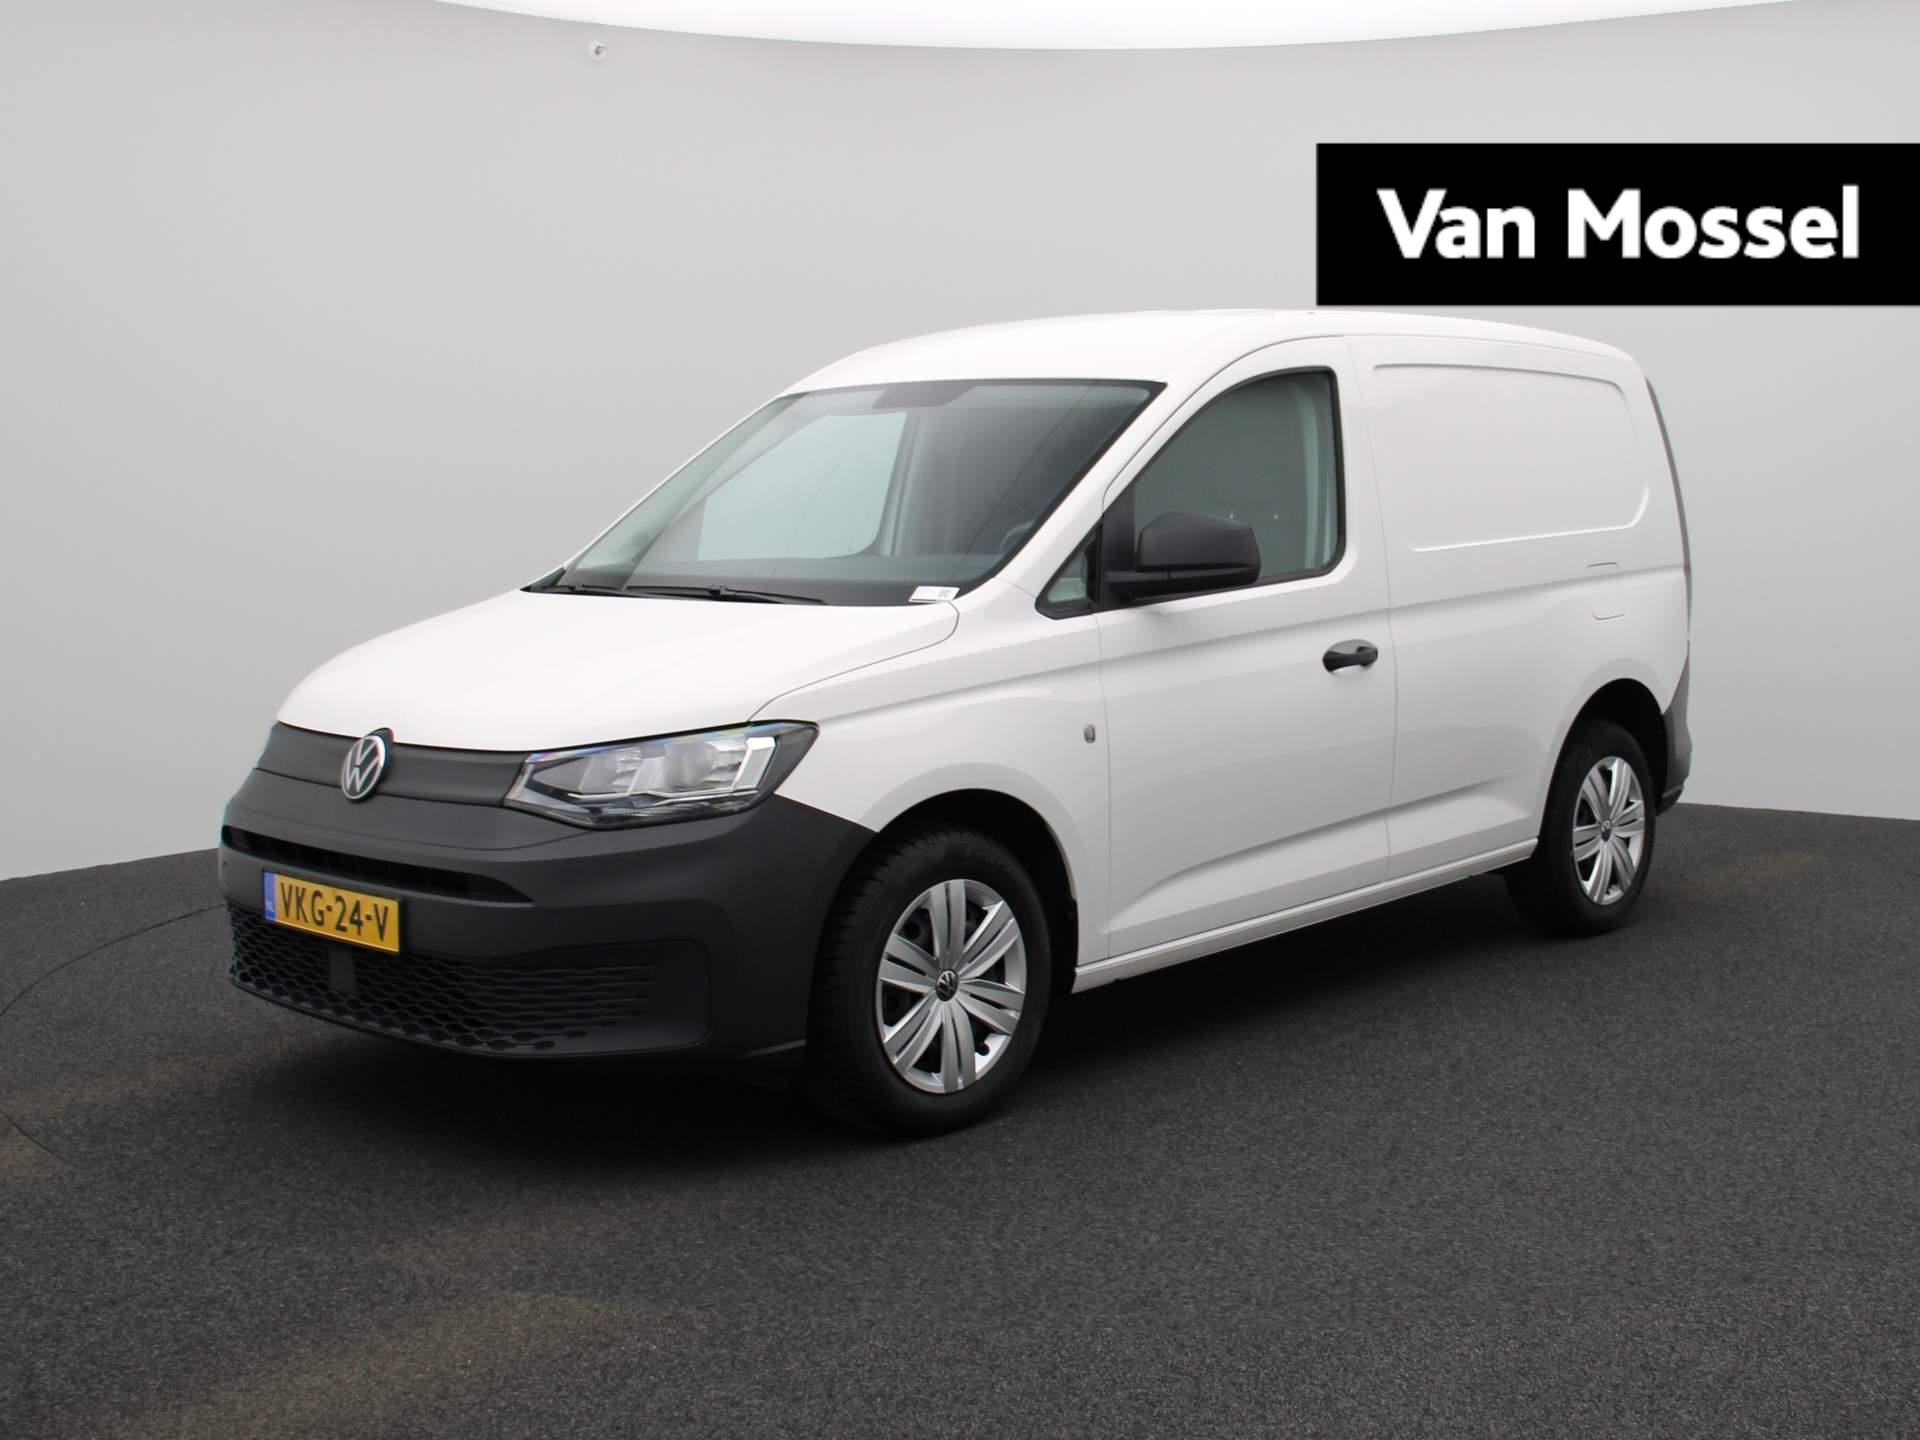 Volkswagen Caddy Cargo 2.0 TDI Trend | Apple Carplay/Android Auto | DAB | Cruise Control | LED | Navi | Start/Stop Systeem | Airco | Zijschuifdeur |